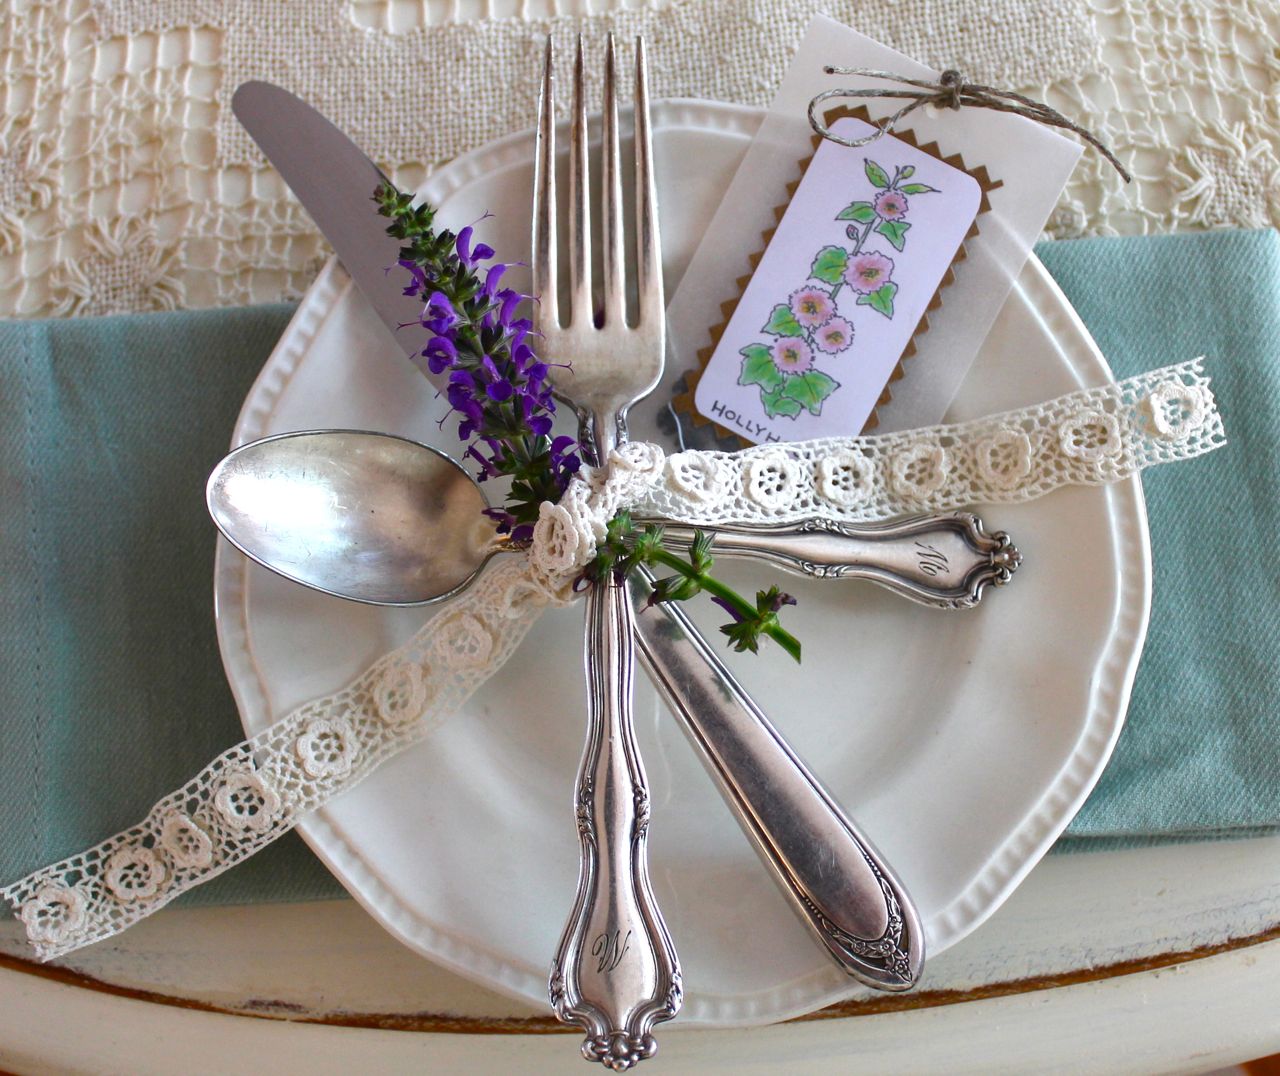 The Vintage House: Lovely Ladies' Luncheon